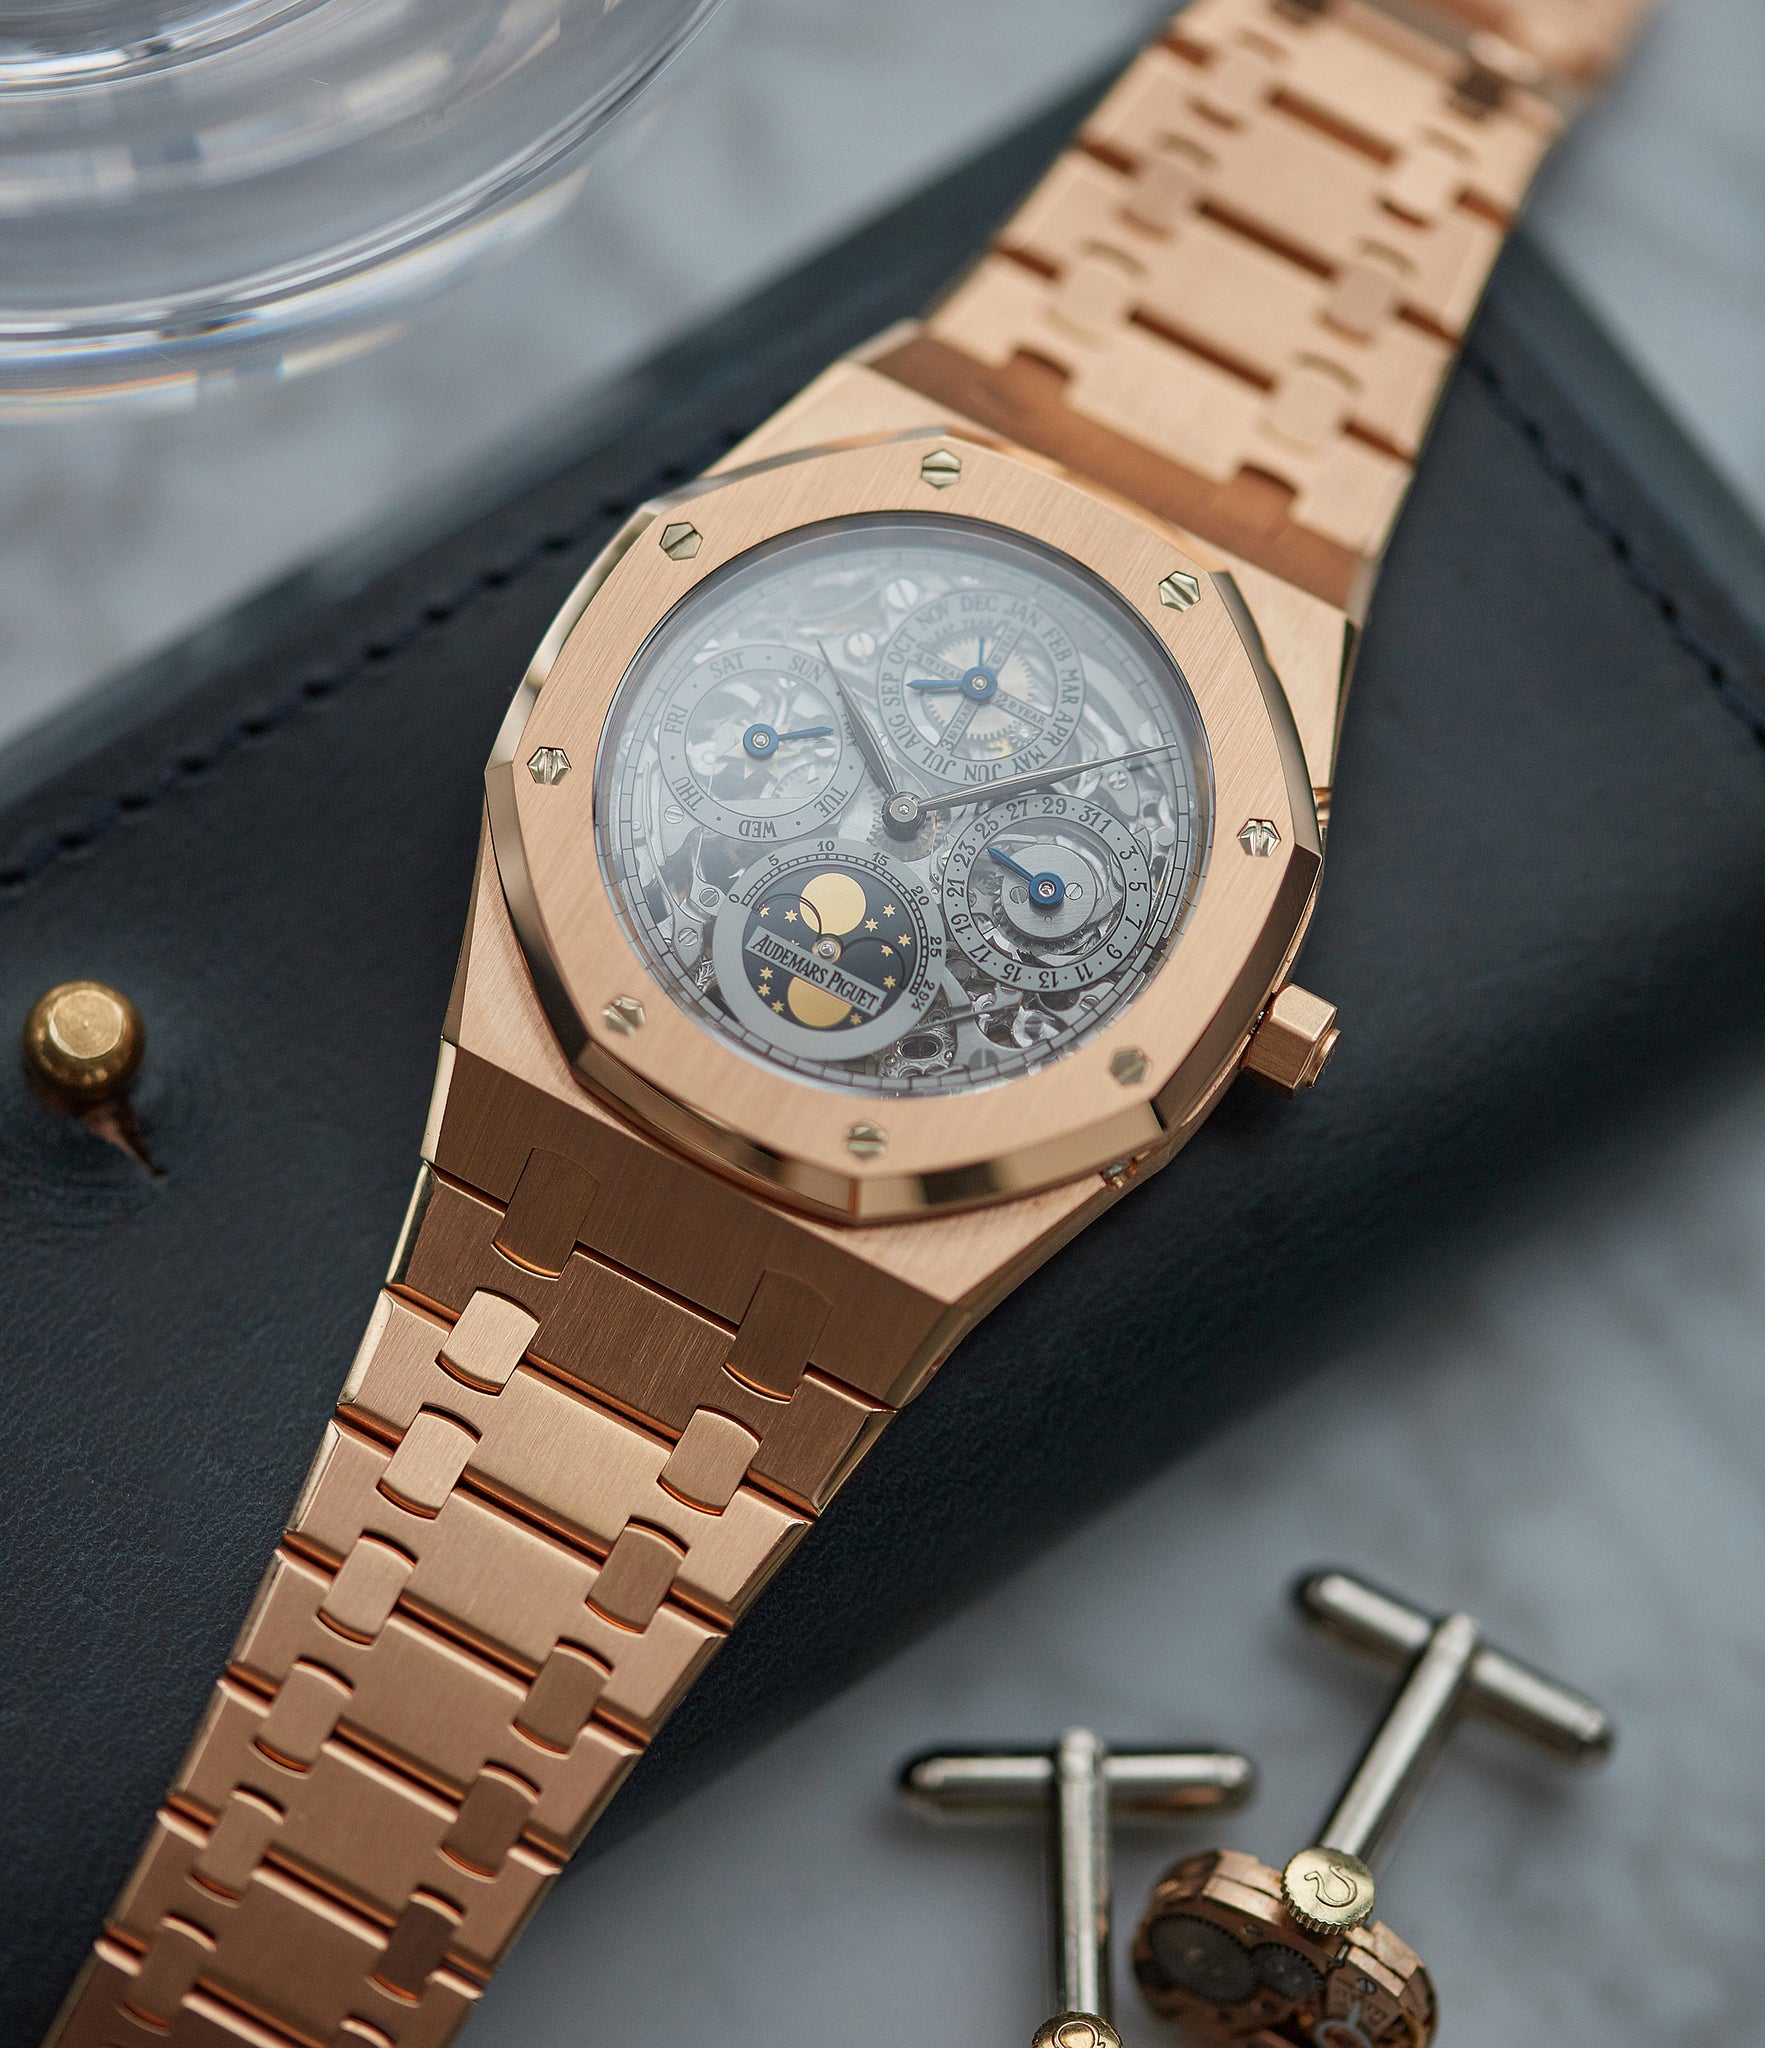 for sale Audemars Piguet Royal Oak 25829OR Quantieme Perpetual Calendar rose gold skeletonised pre-owned sport watch for sale online at A Collected Man London UK specialist of rare watches